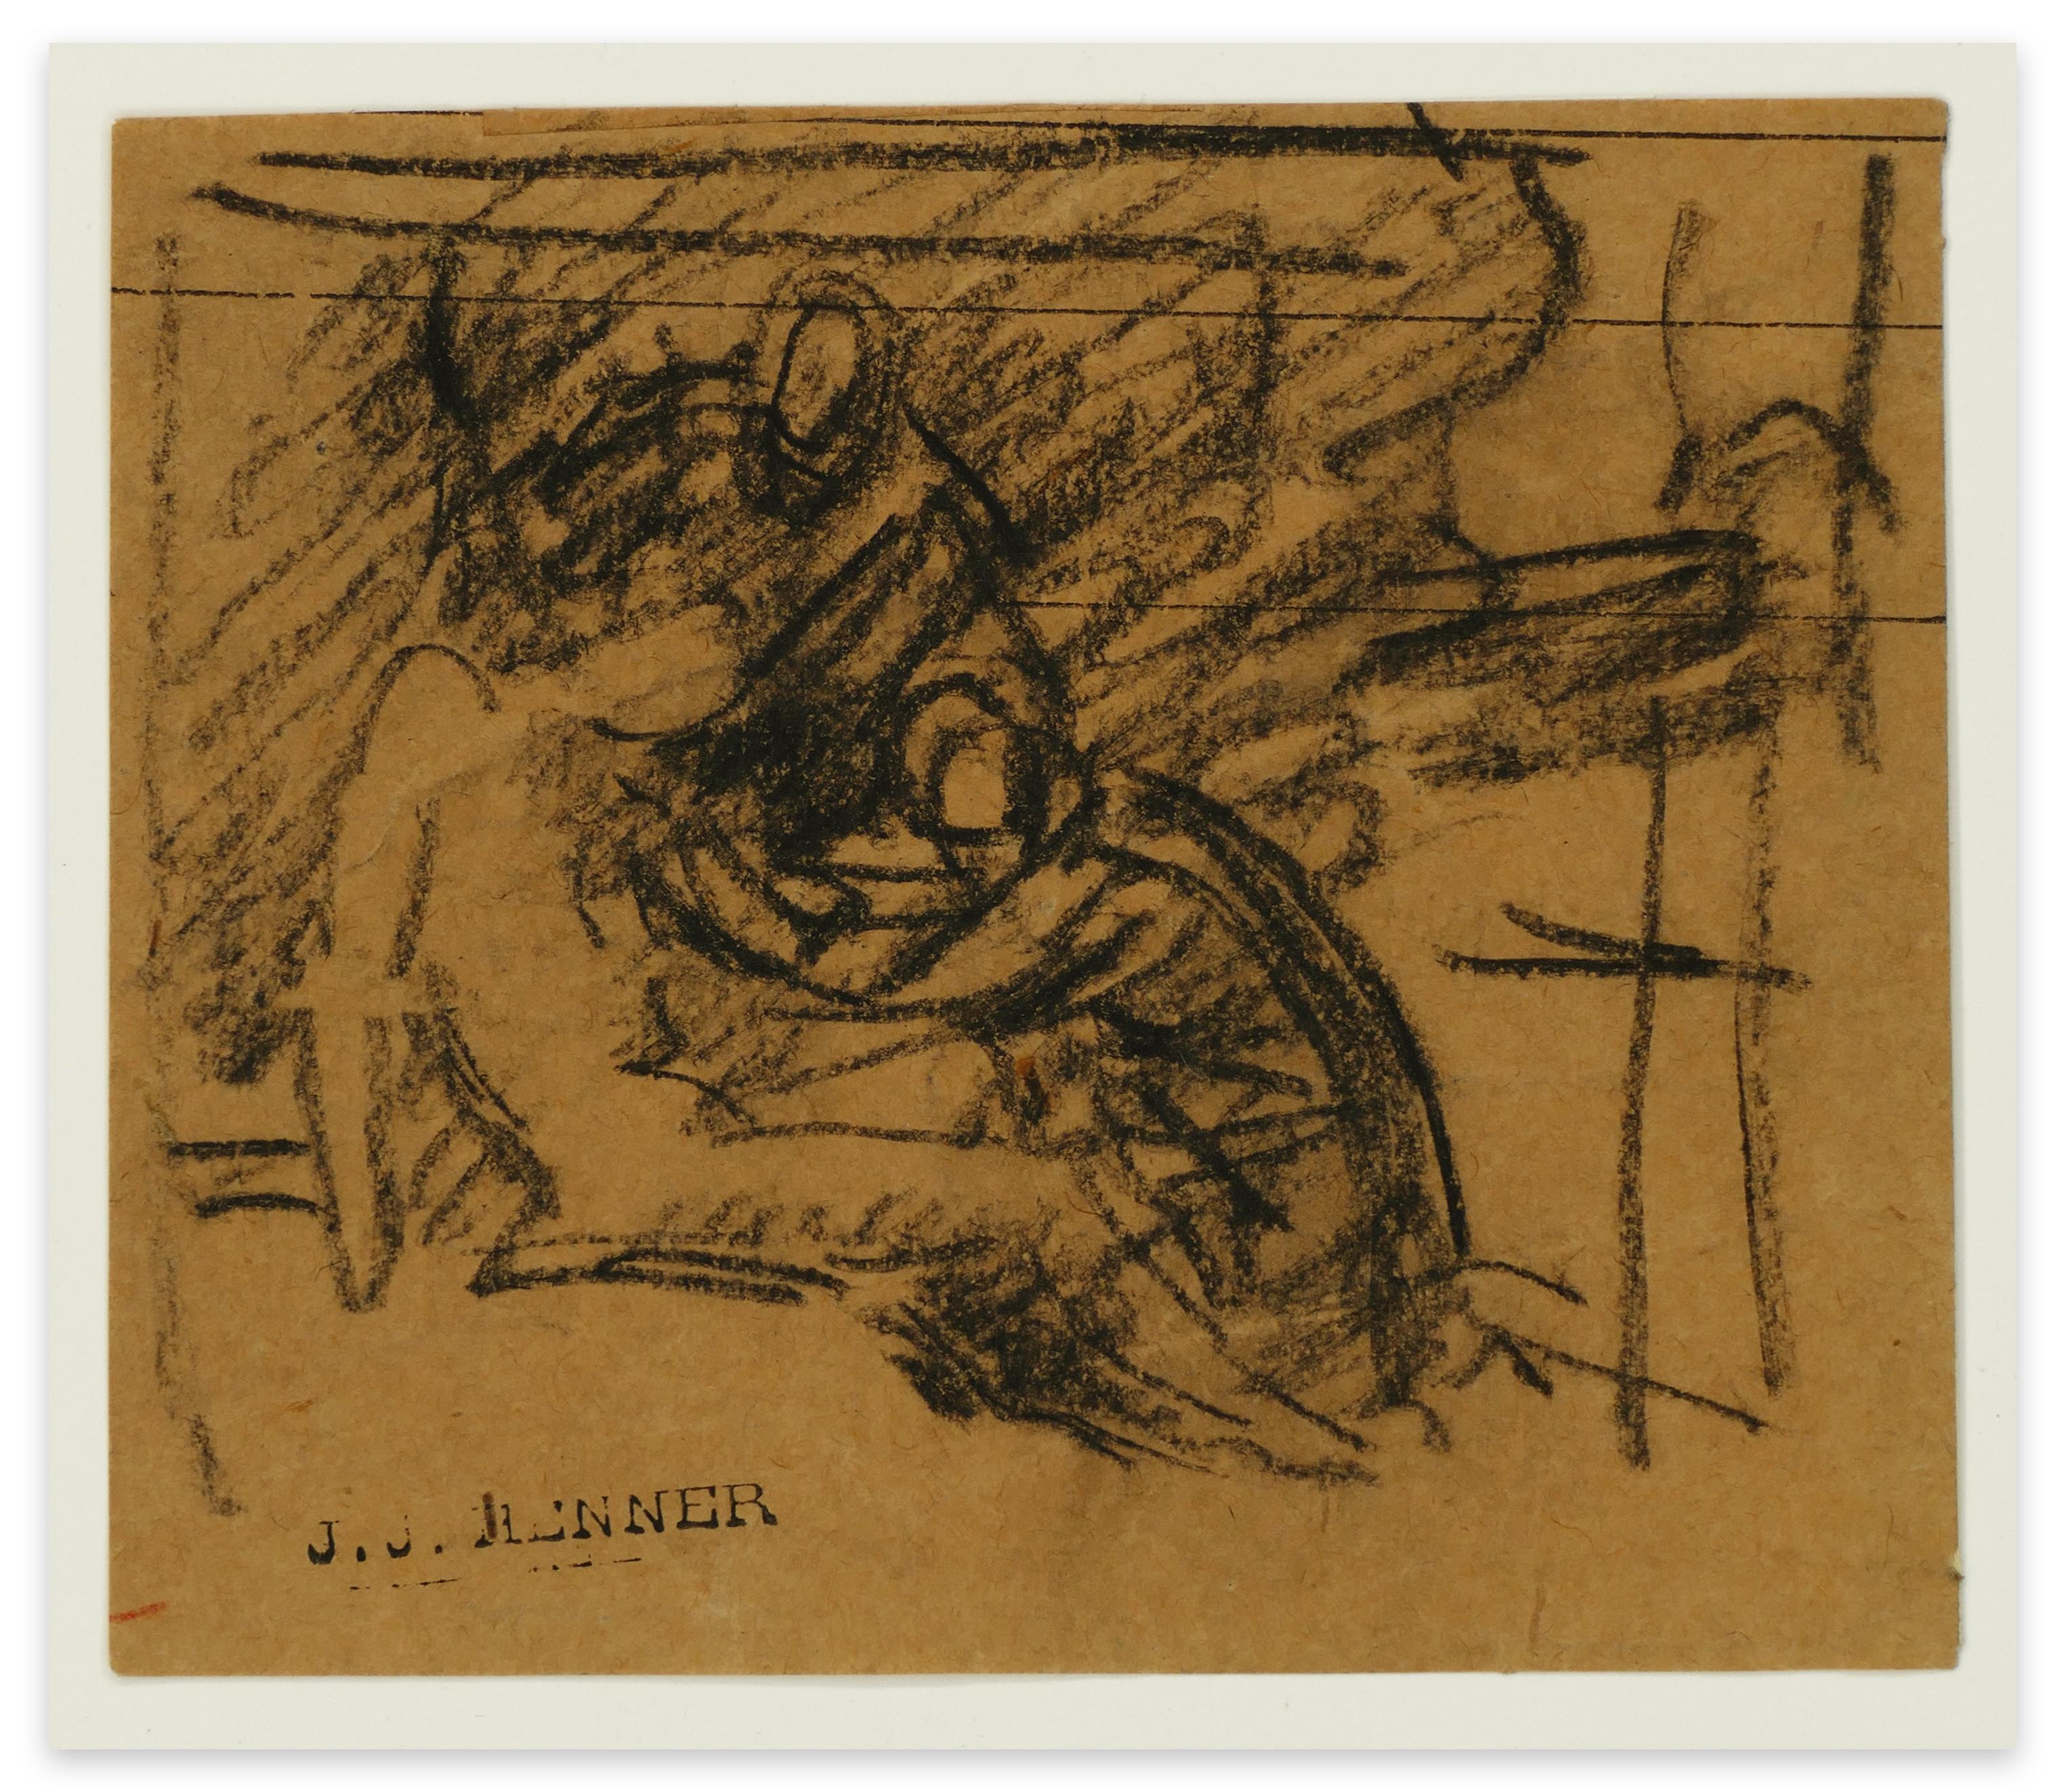 Jean-Jacques Henner Figurative Art - The Deposition - Original Charcoal Drawing - Late 19th Century